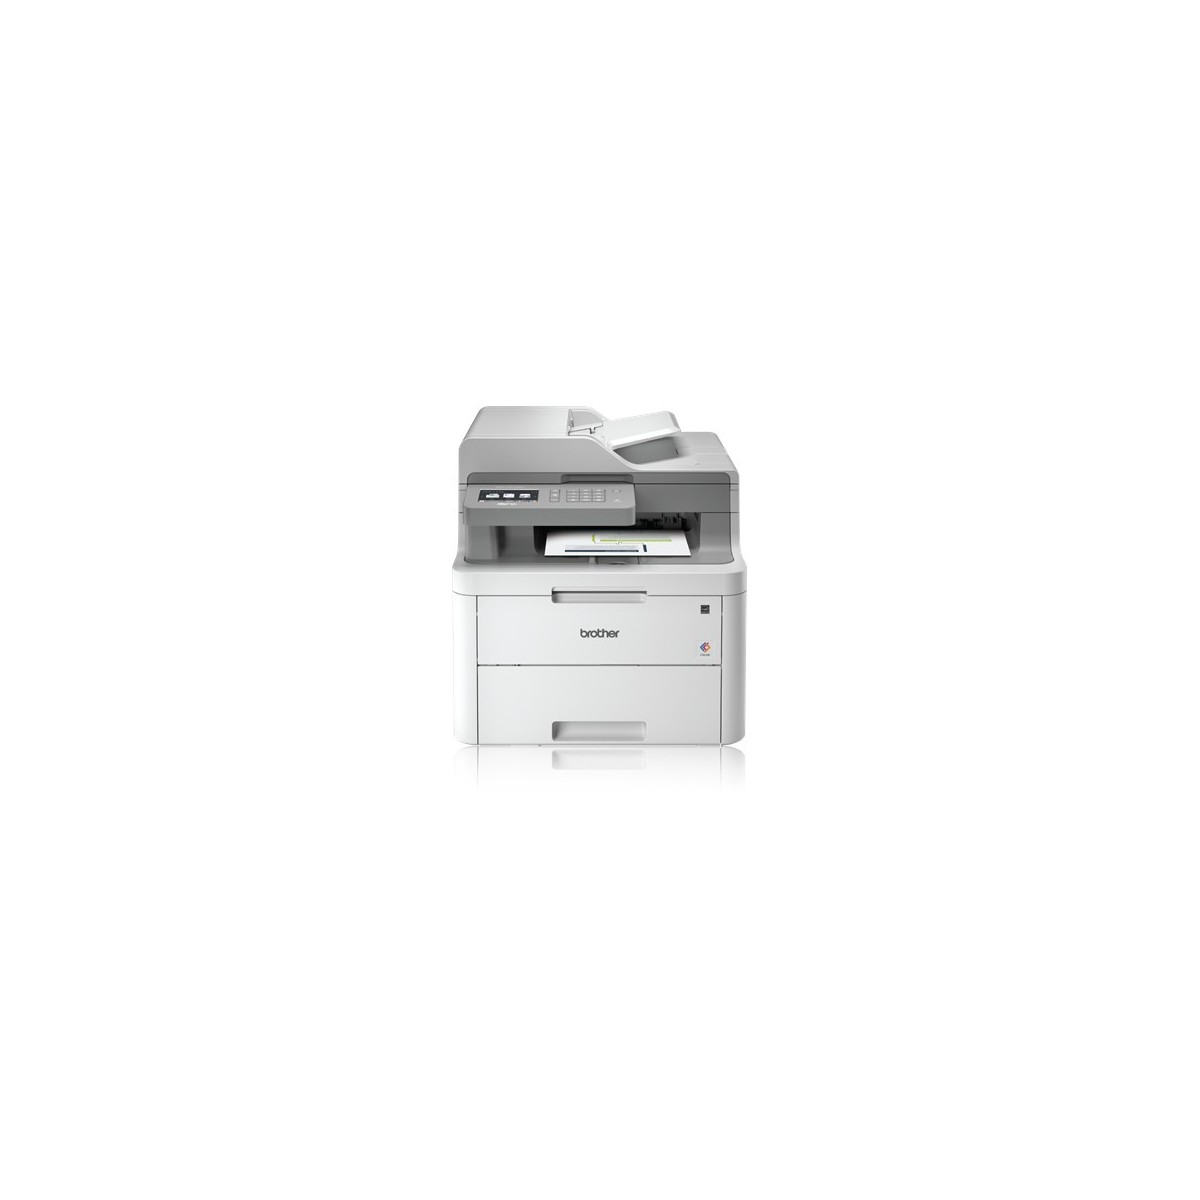 Brother MFC-L3710CW - LED - Colour printing - 2400 x 600 DPI - A4 - Direct printing - Grey,White